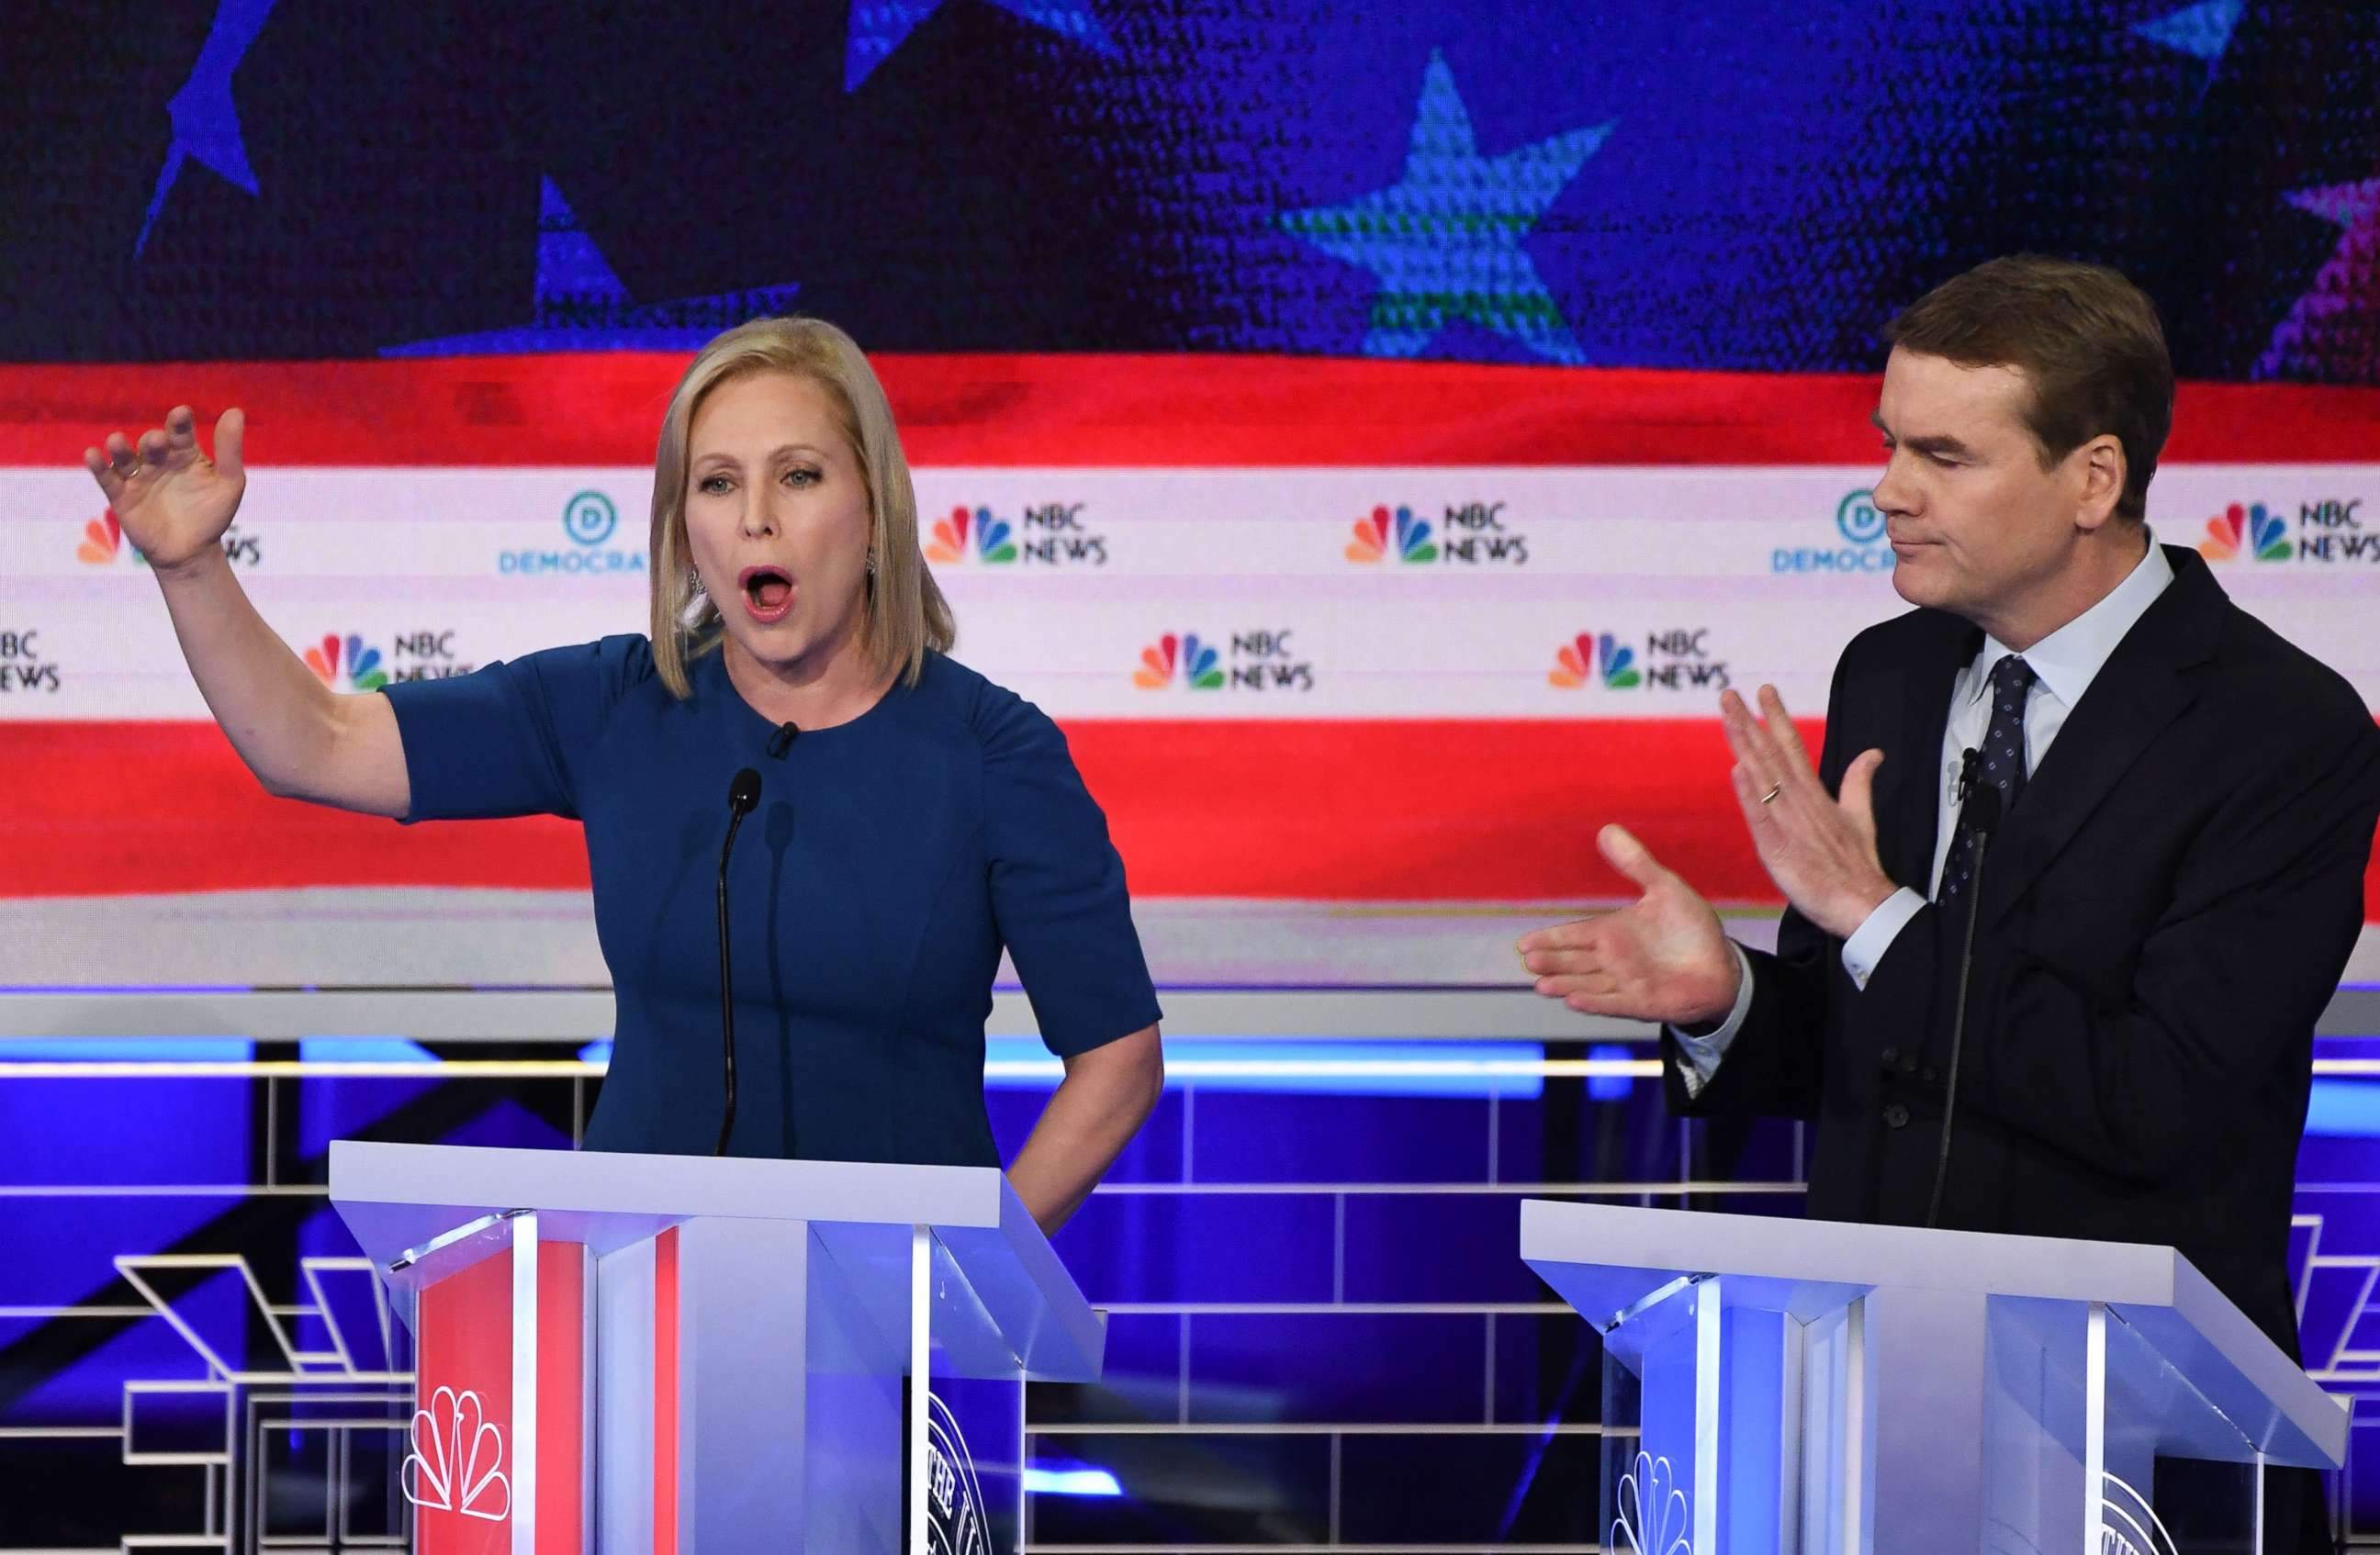 PHOTO: Kristen Gillibrand and Michael Bennet participate in the second night of the first 2020 democratic presidential debate at the Adrienne Arsht Center for the Performing Arts in Miami, June 27, 2019.